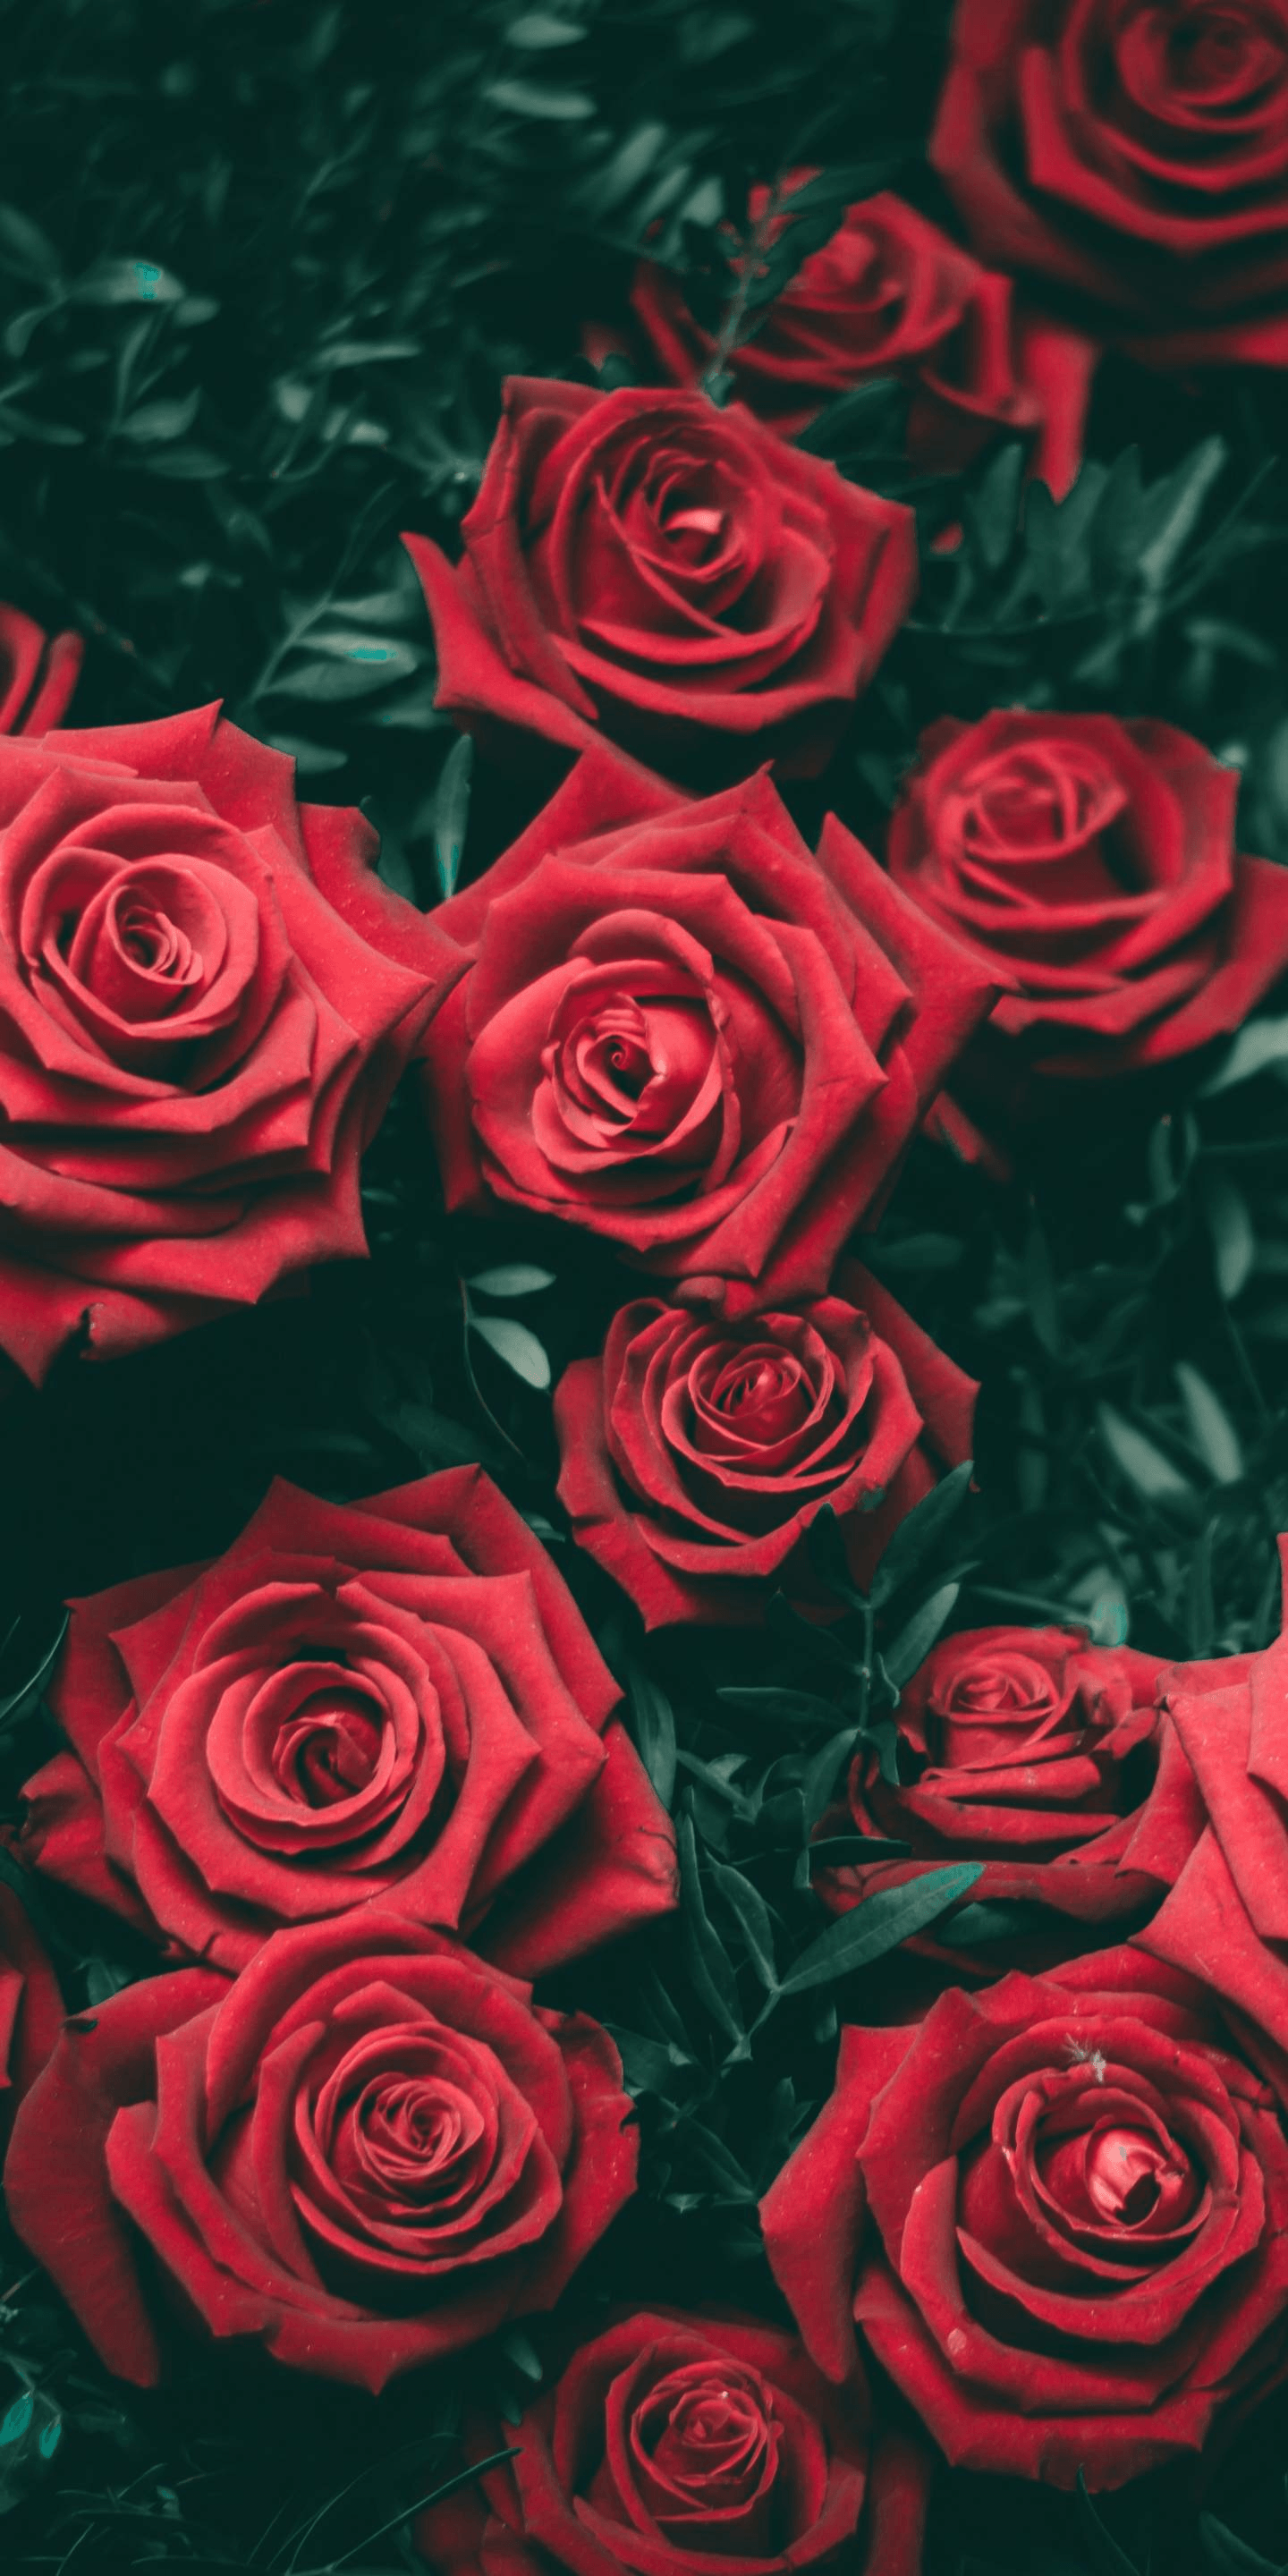 A close up of many red roses - Flower, gothic, roses